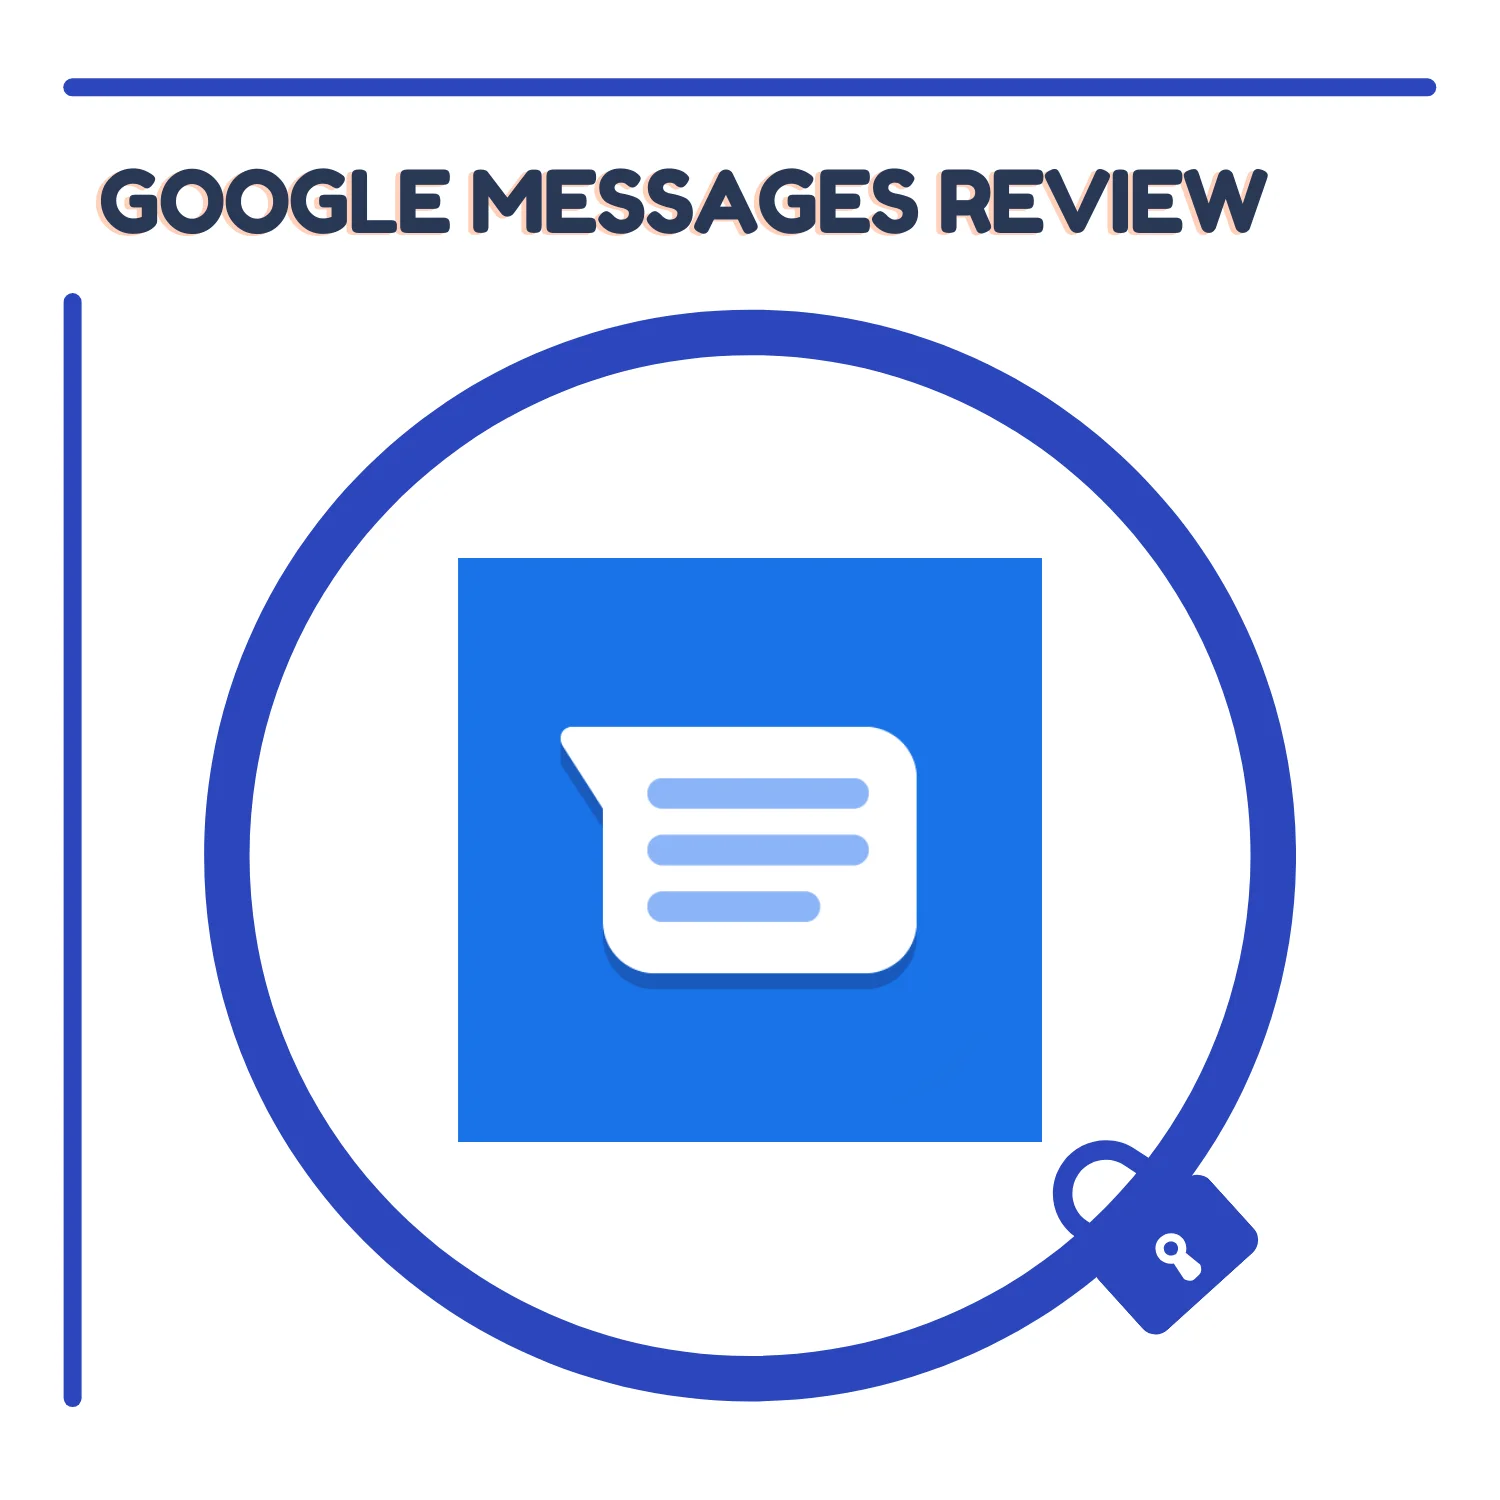 Google Messages Review